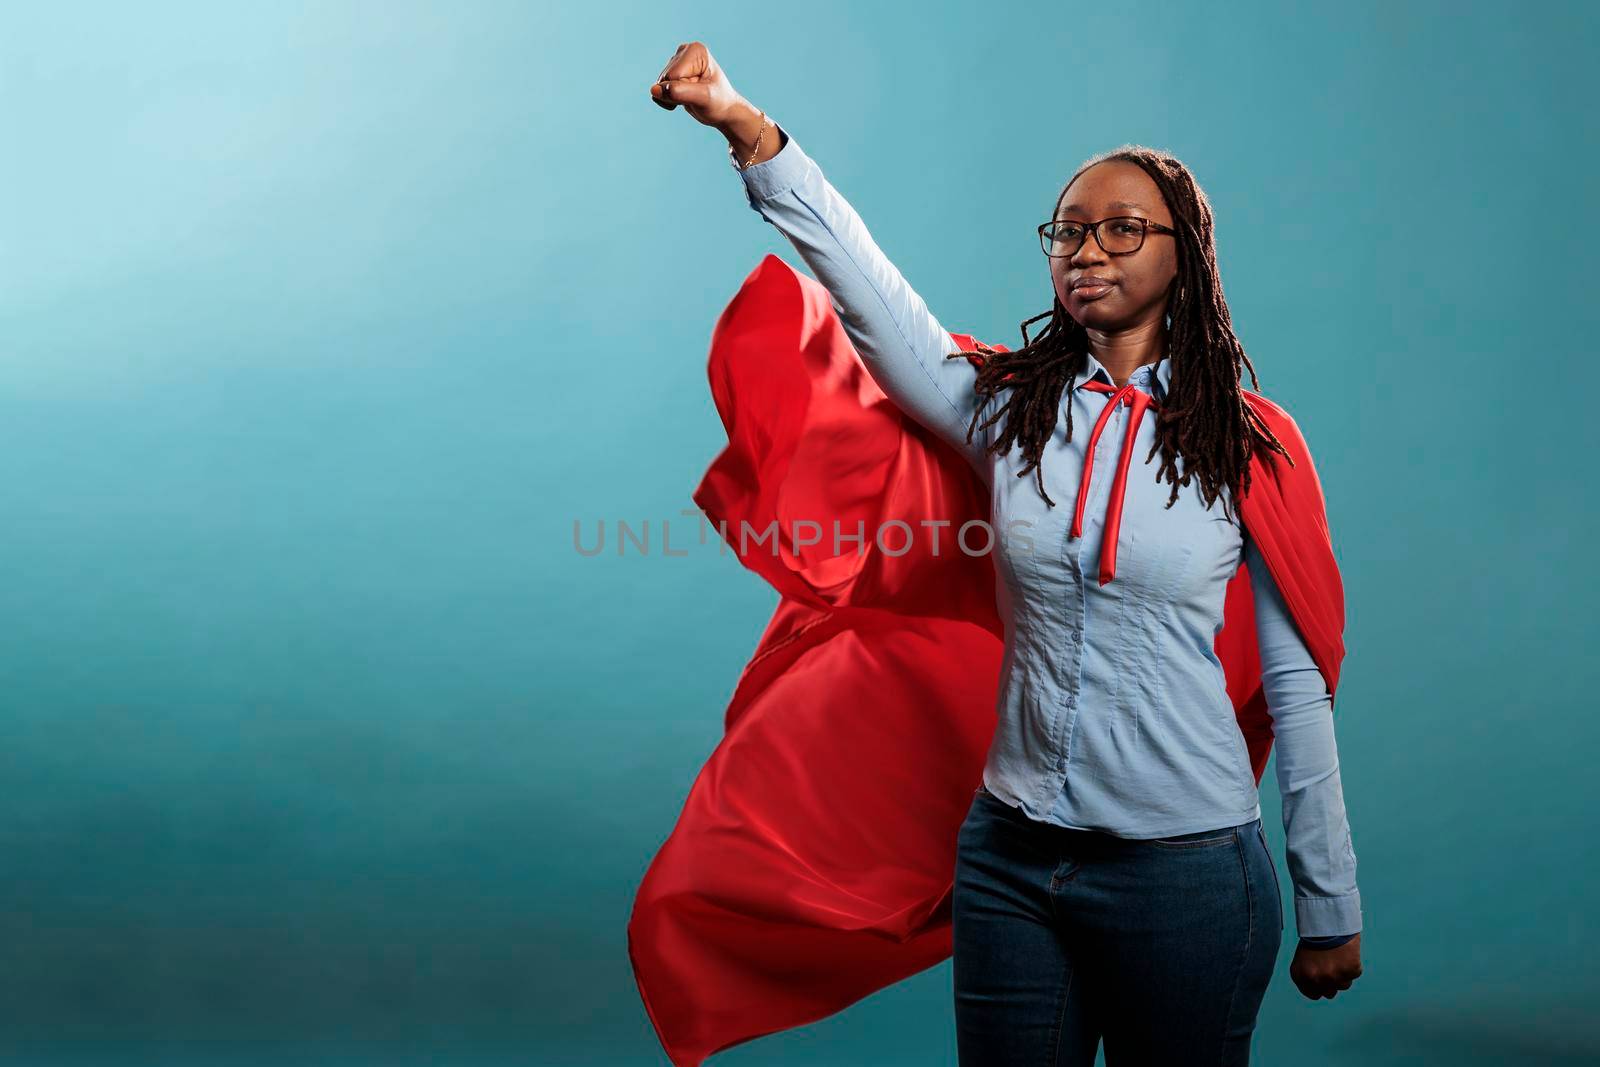 Brave and proud looking young adult superhero woman acting like a flying hero while wearing mighty cape on blue background. Strong justice defender with superpowers looking at camera with fist in air.